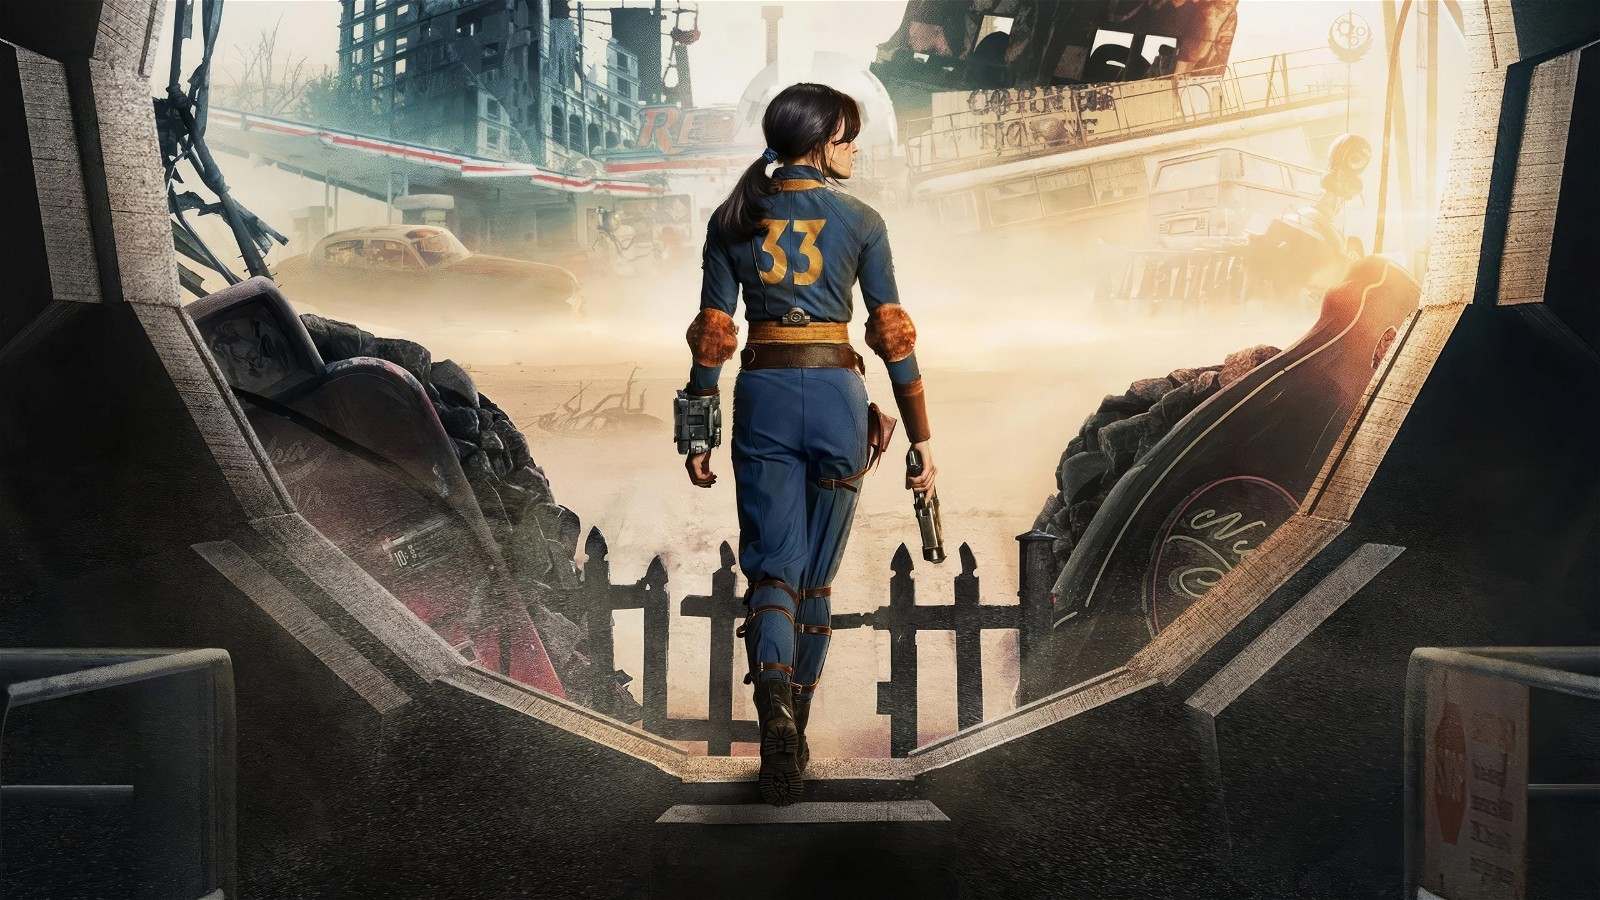 Fallout's casting and narrative choices raise high expectations from the show. Credit: Amazon